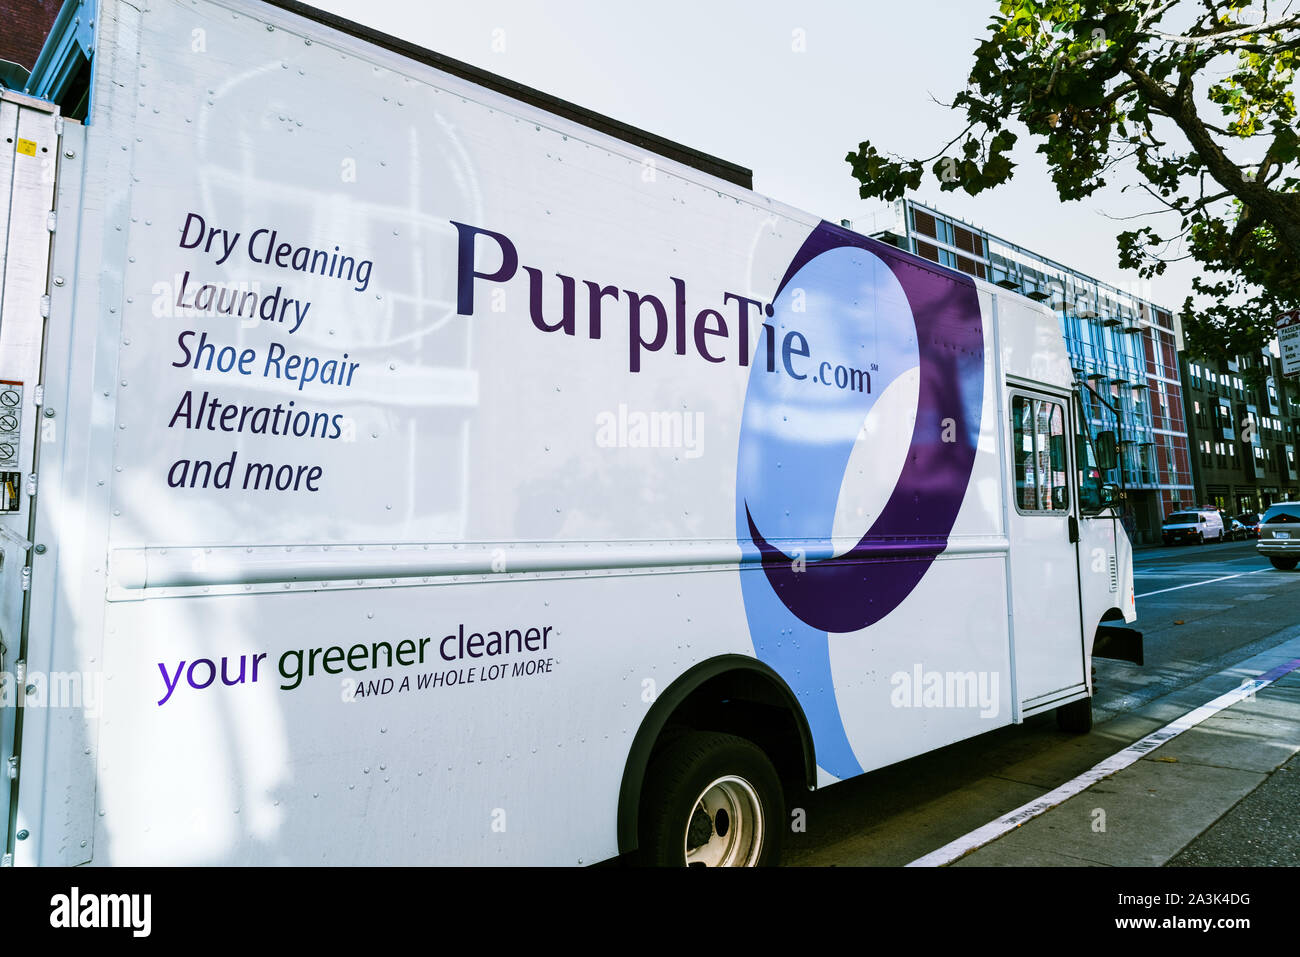 Sep 20, 2019 San Francisco / CA / USA - PurpleTie van; PurpleTie offers Dry Cleaning, Laundry and other services to corporate and residential customer Stock Photo